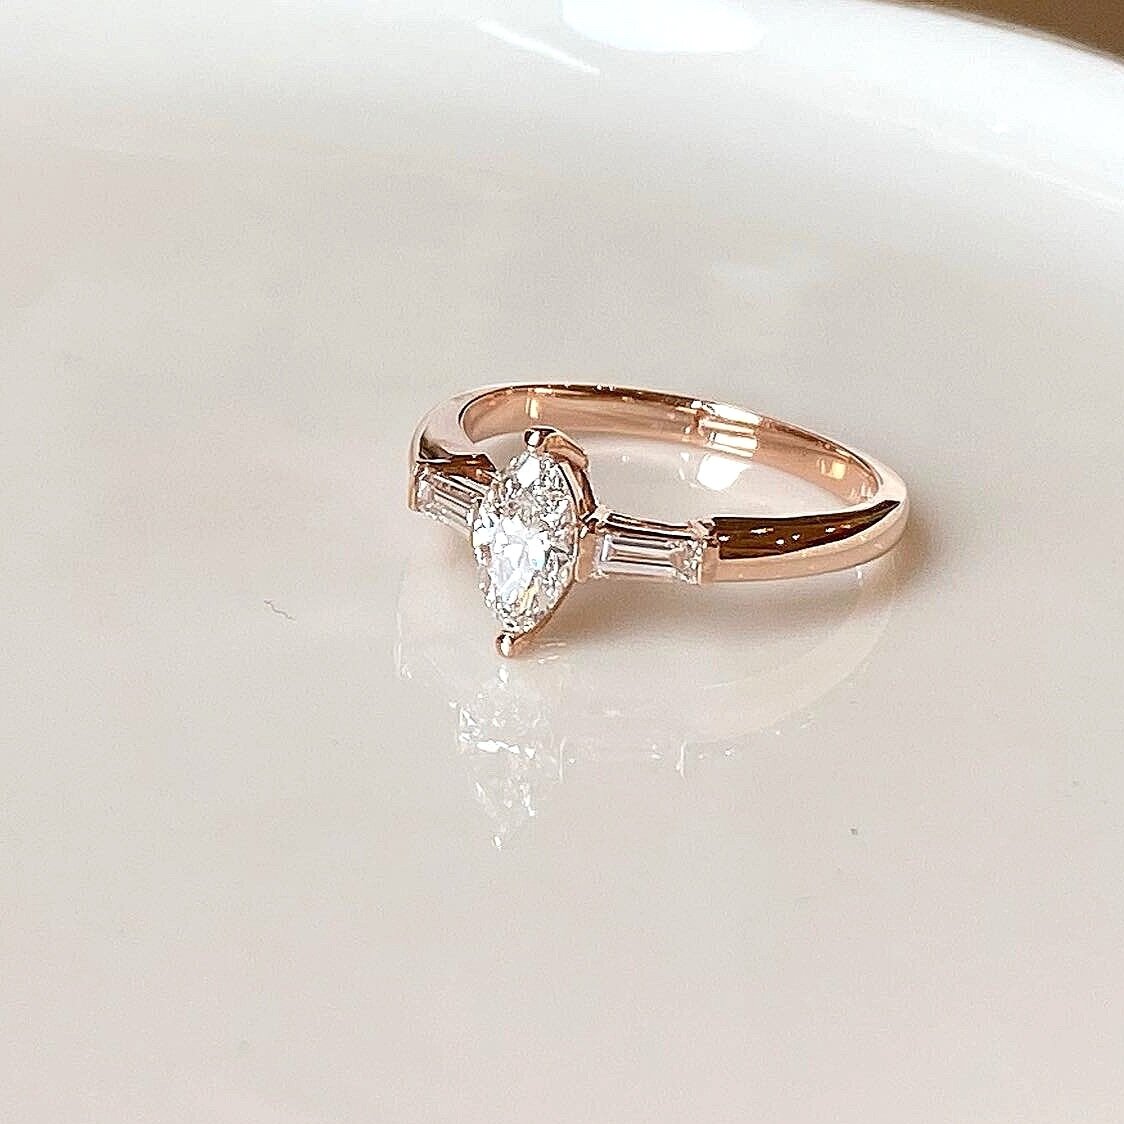 14k rose gold ring with marquis diamond and diamond tapered baguettes